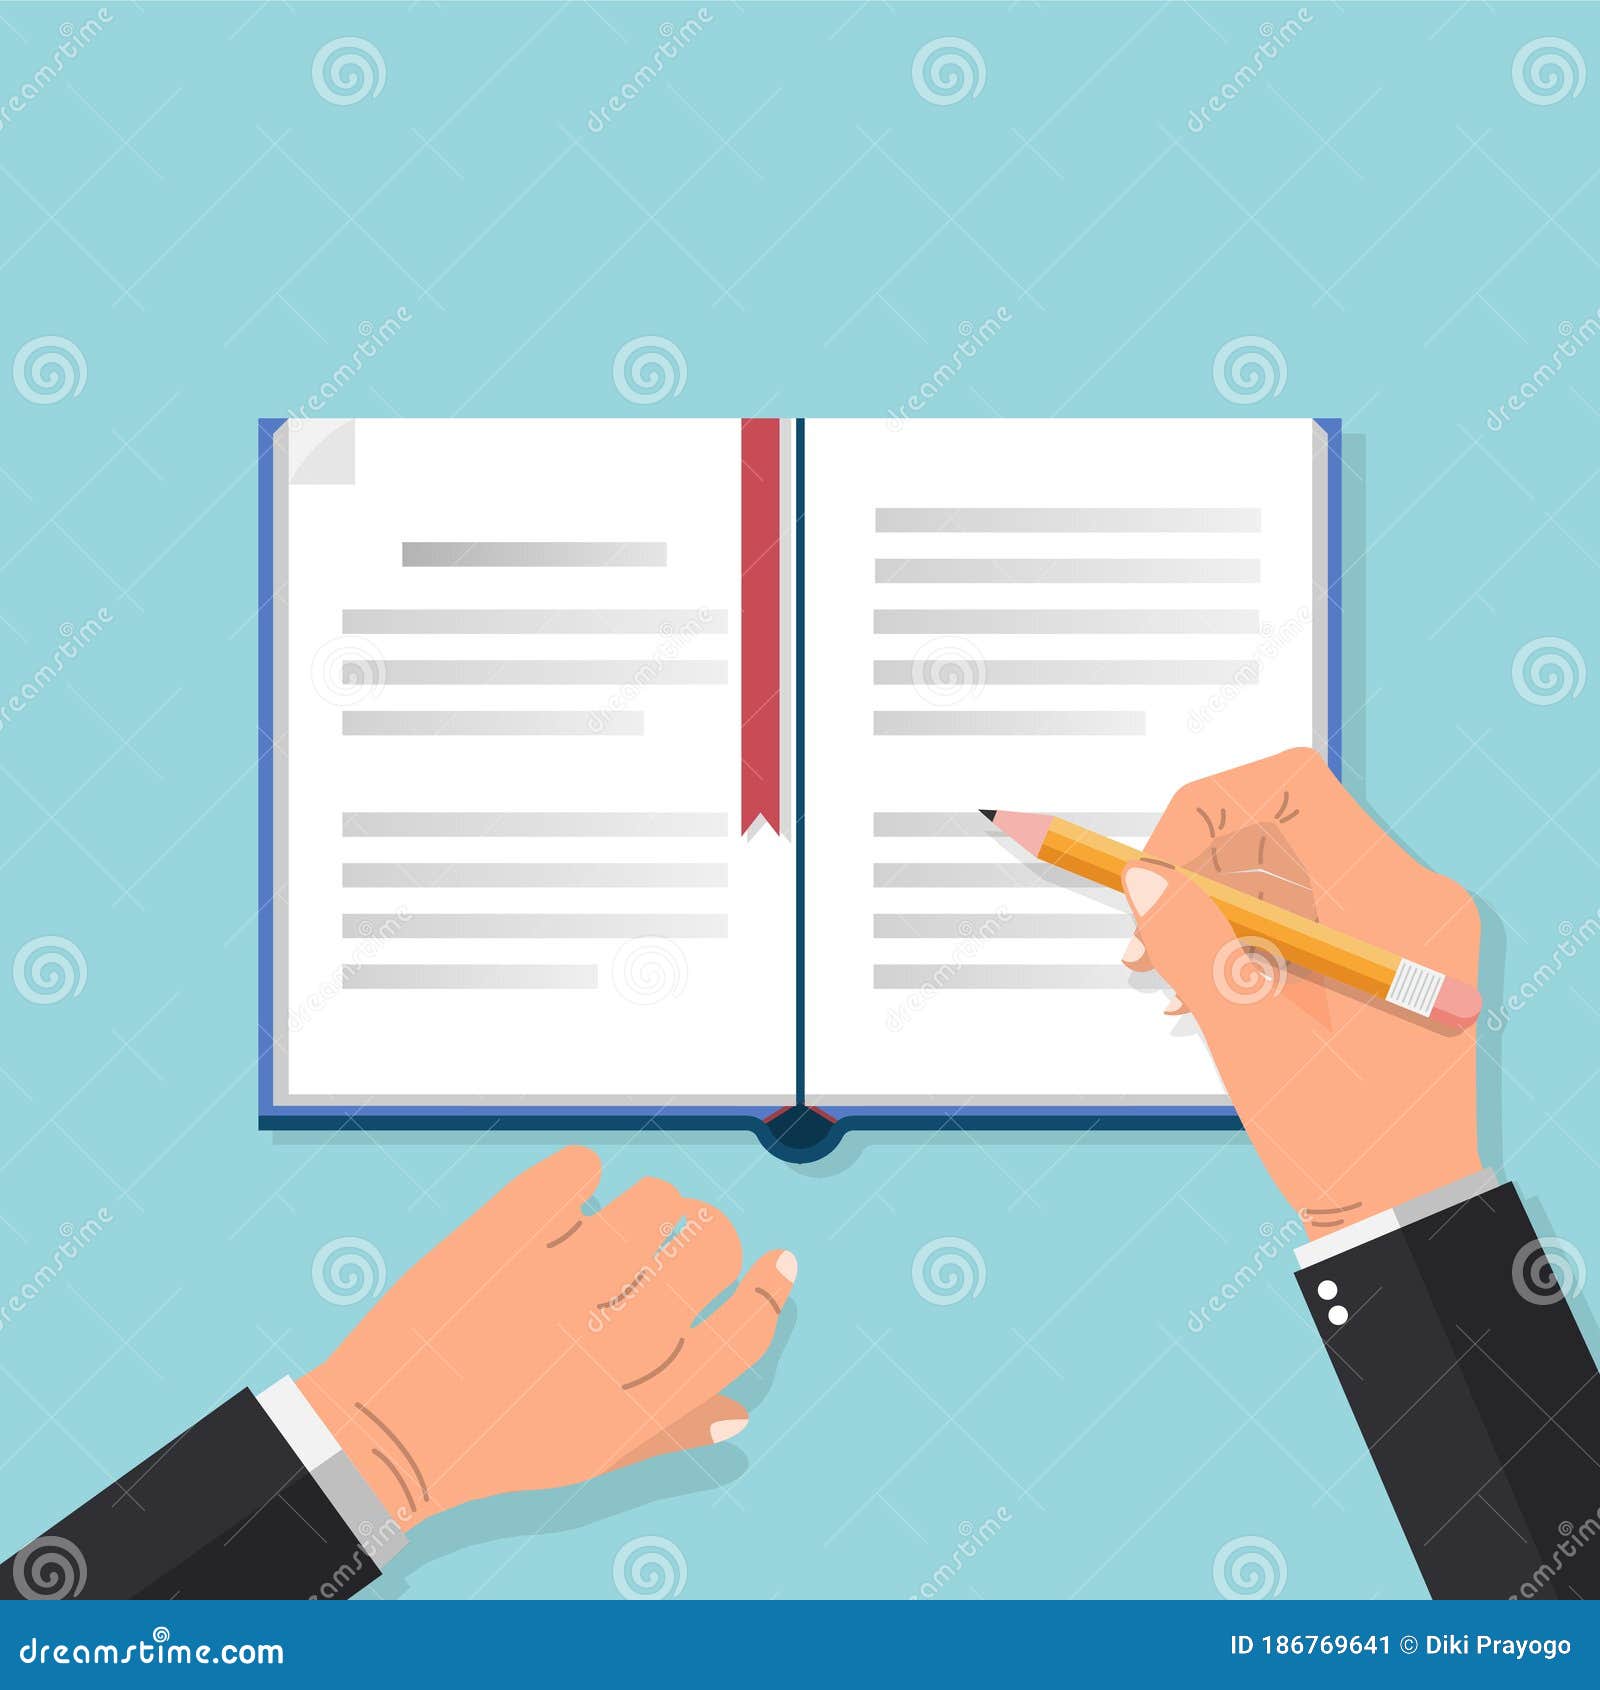 businessman hands with pen writes on a book page. studying and summarize concept. flat style  